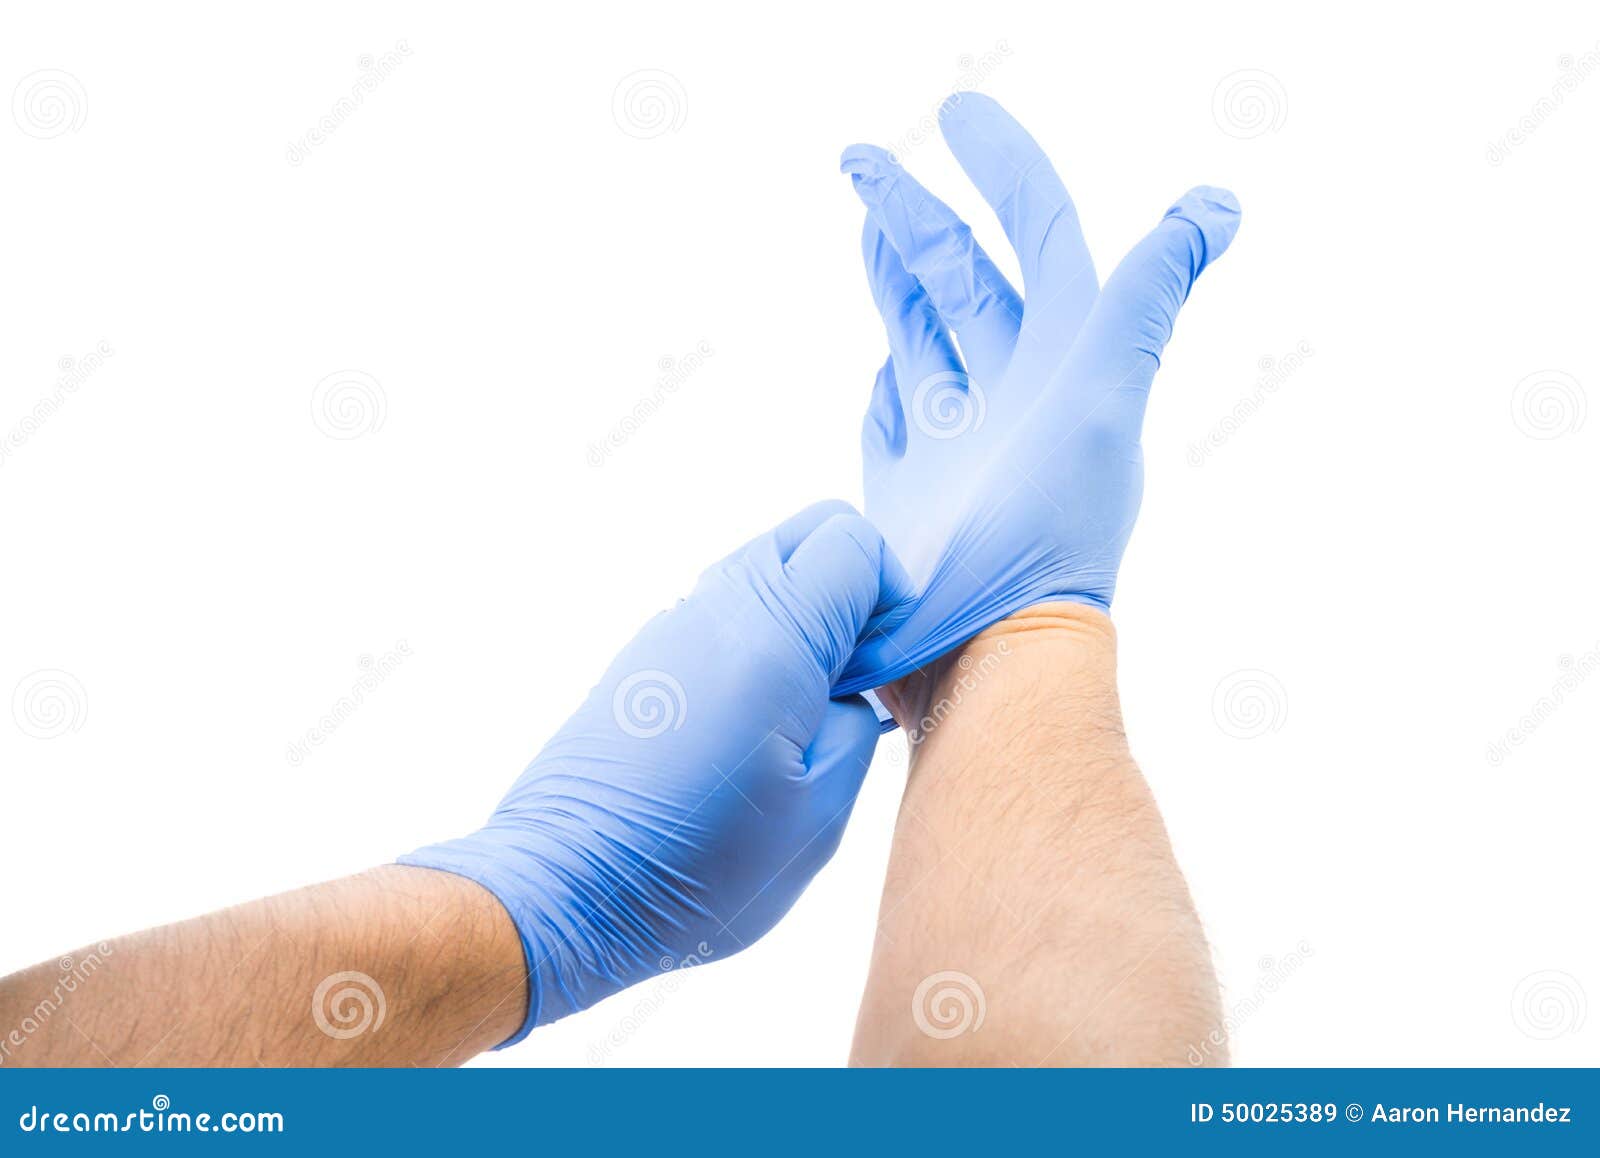 male putting on latex gloves